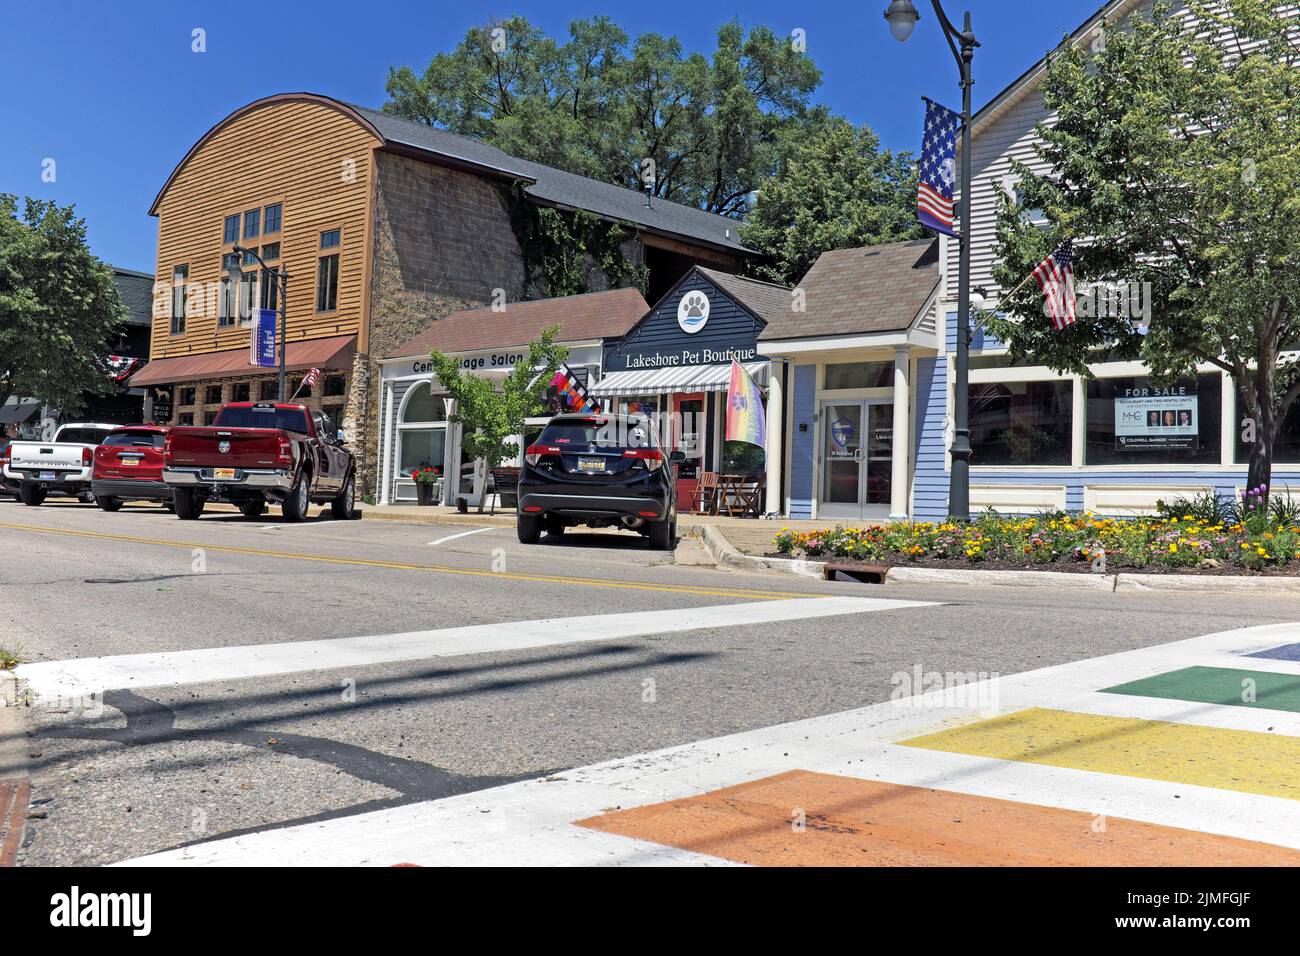 Small businesses line Center Street in the LGBTQ-friendly summer resort town of Douglas, Michigan, USA. Stock Photo